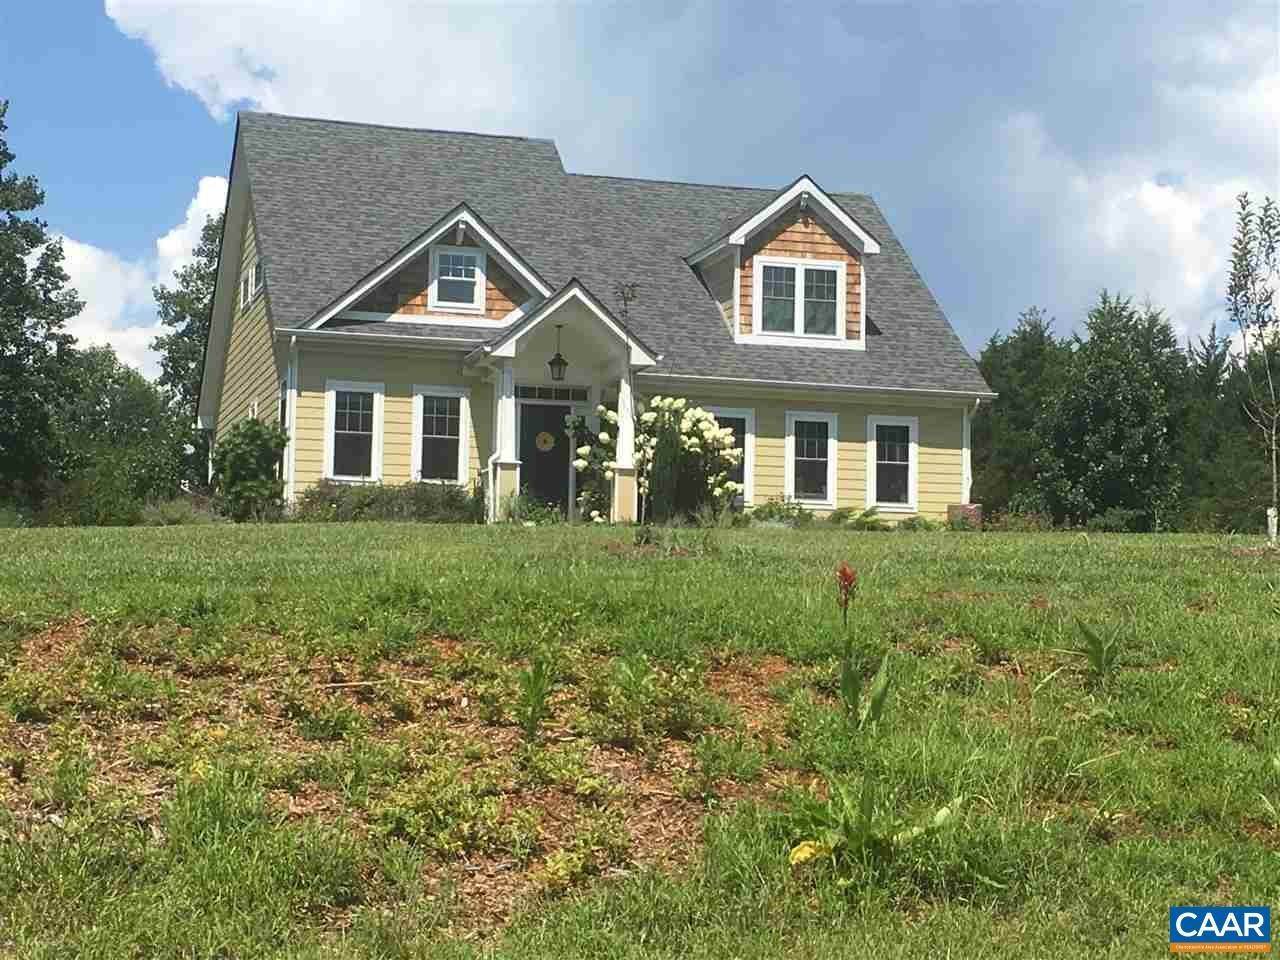 6. Land for Sale at 10 RIDGEVIEW Drive Ruckersville, Virginia 22968 United States